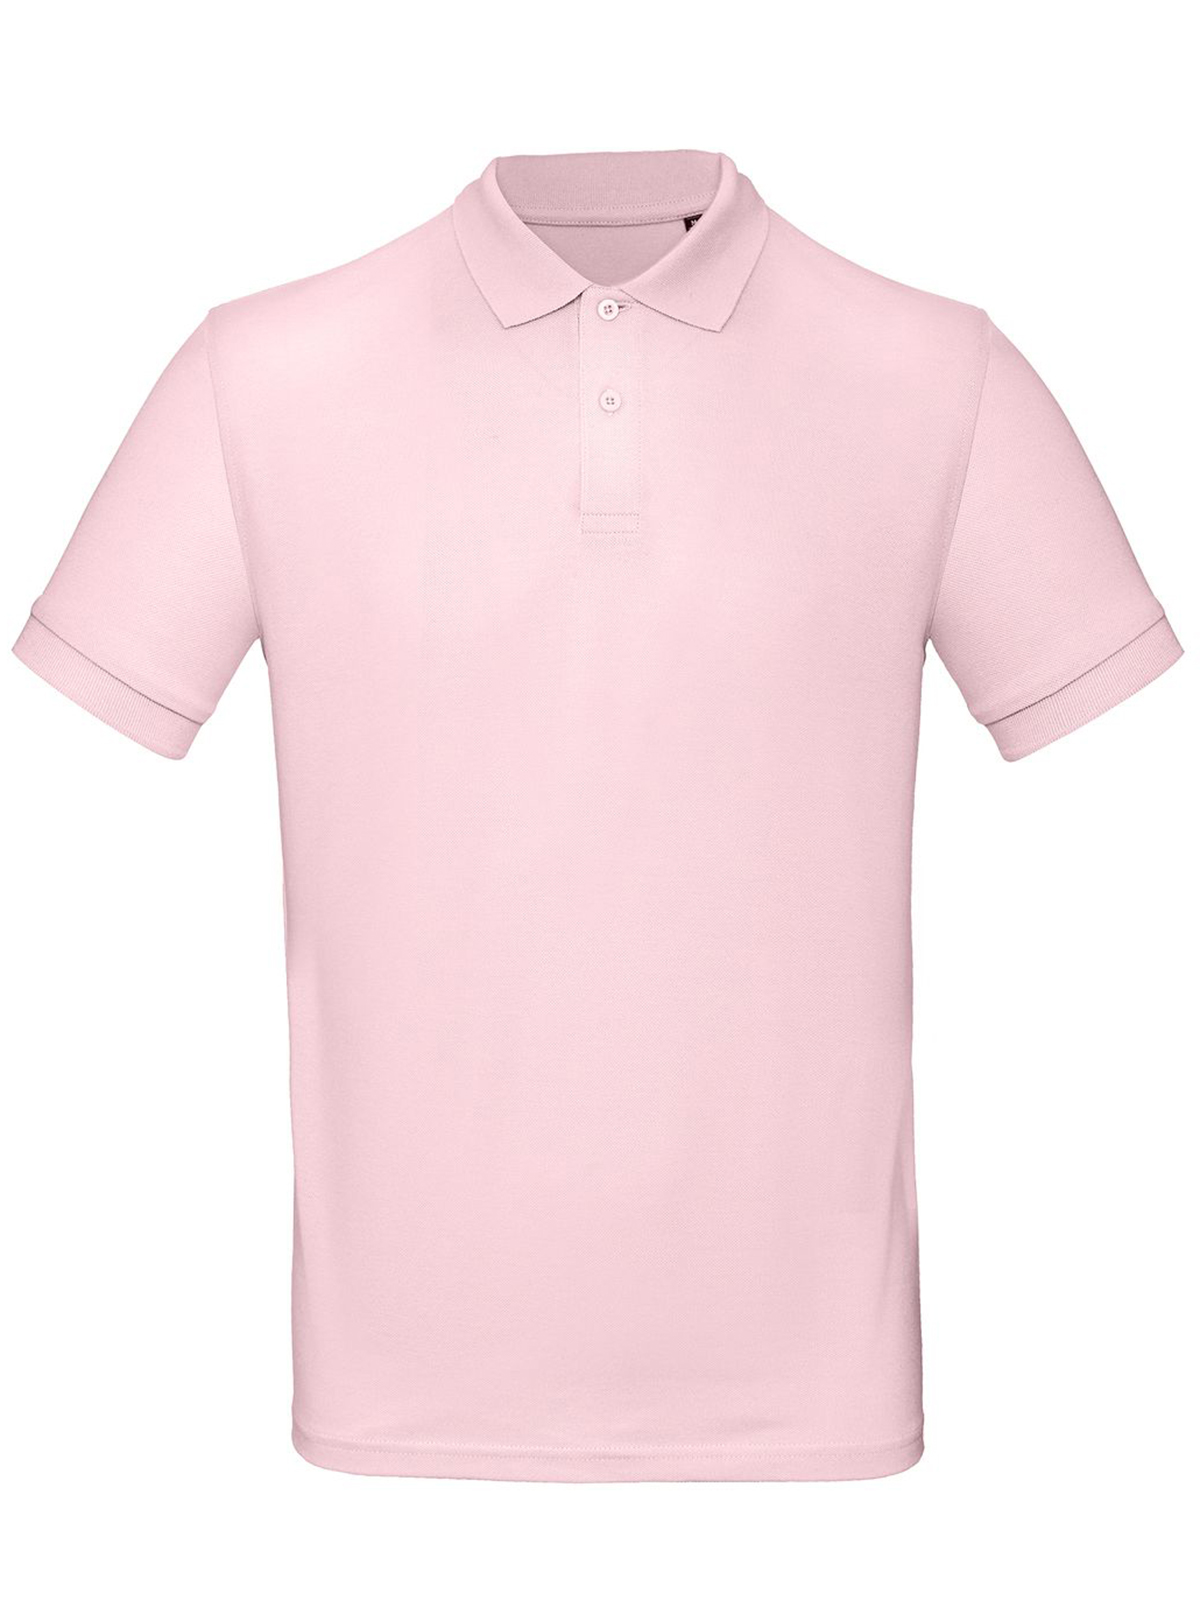 inspire-polo-men-orchid-pink.webp